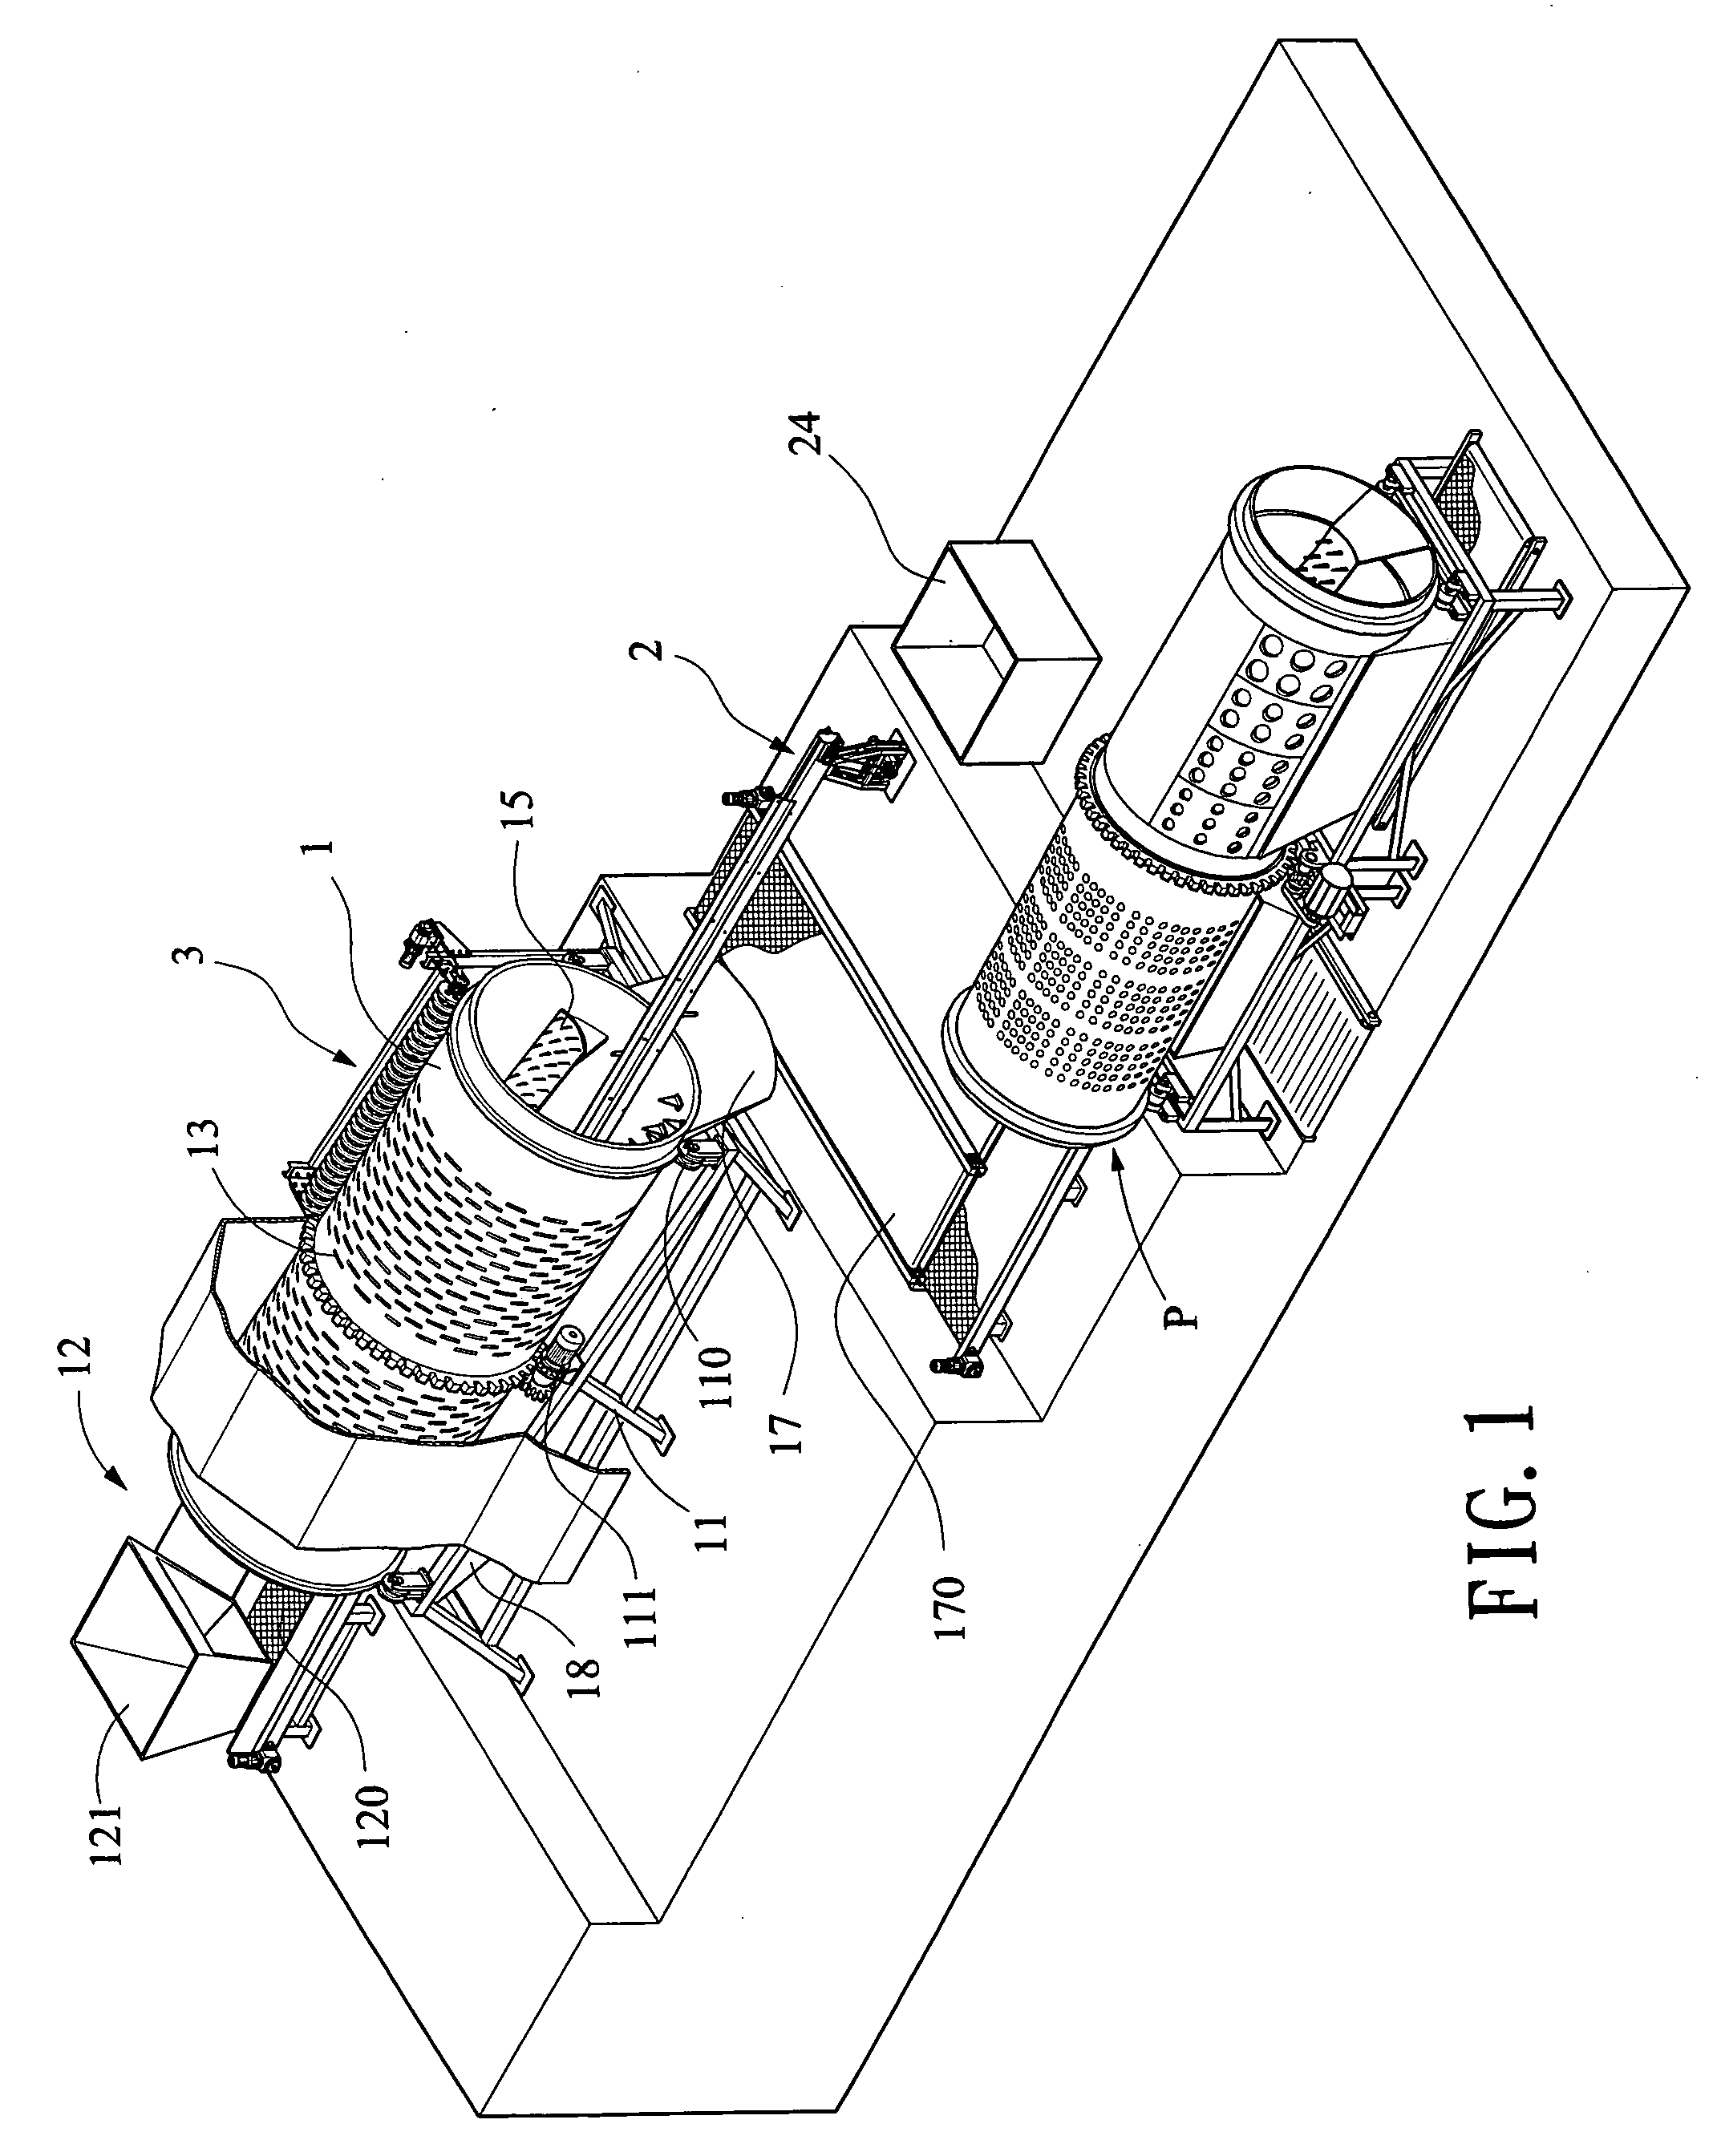 Apparatus for piercing garbage bags and collecting nonrigid, elongate objects and powder